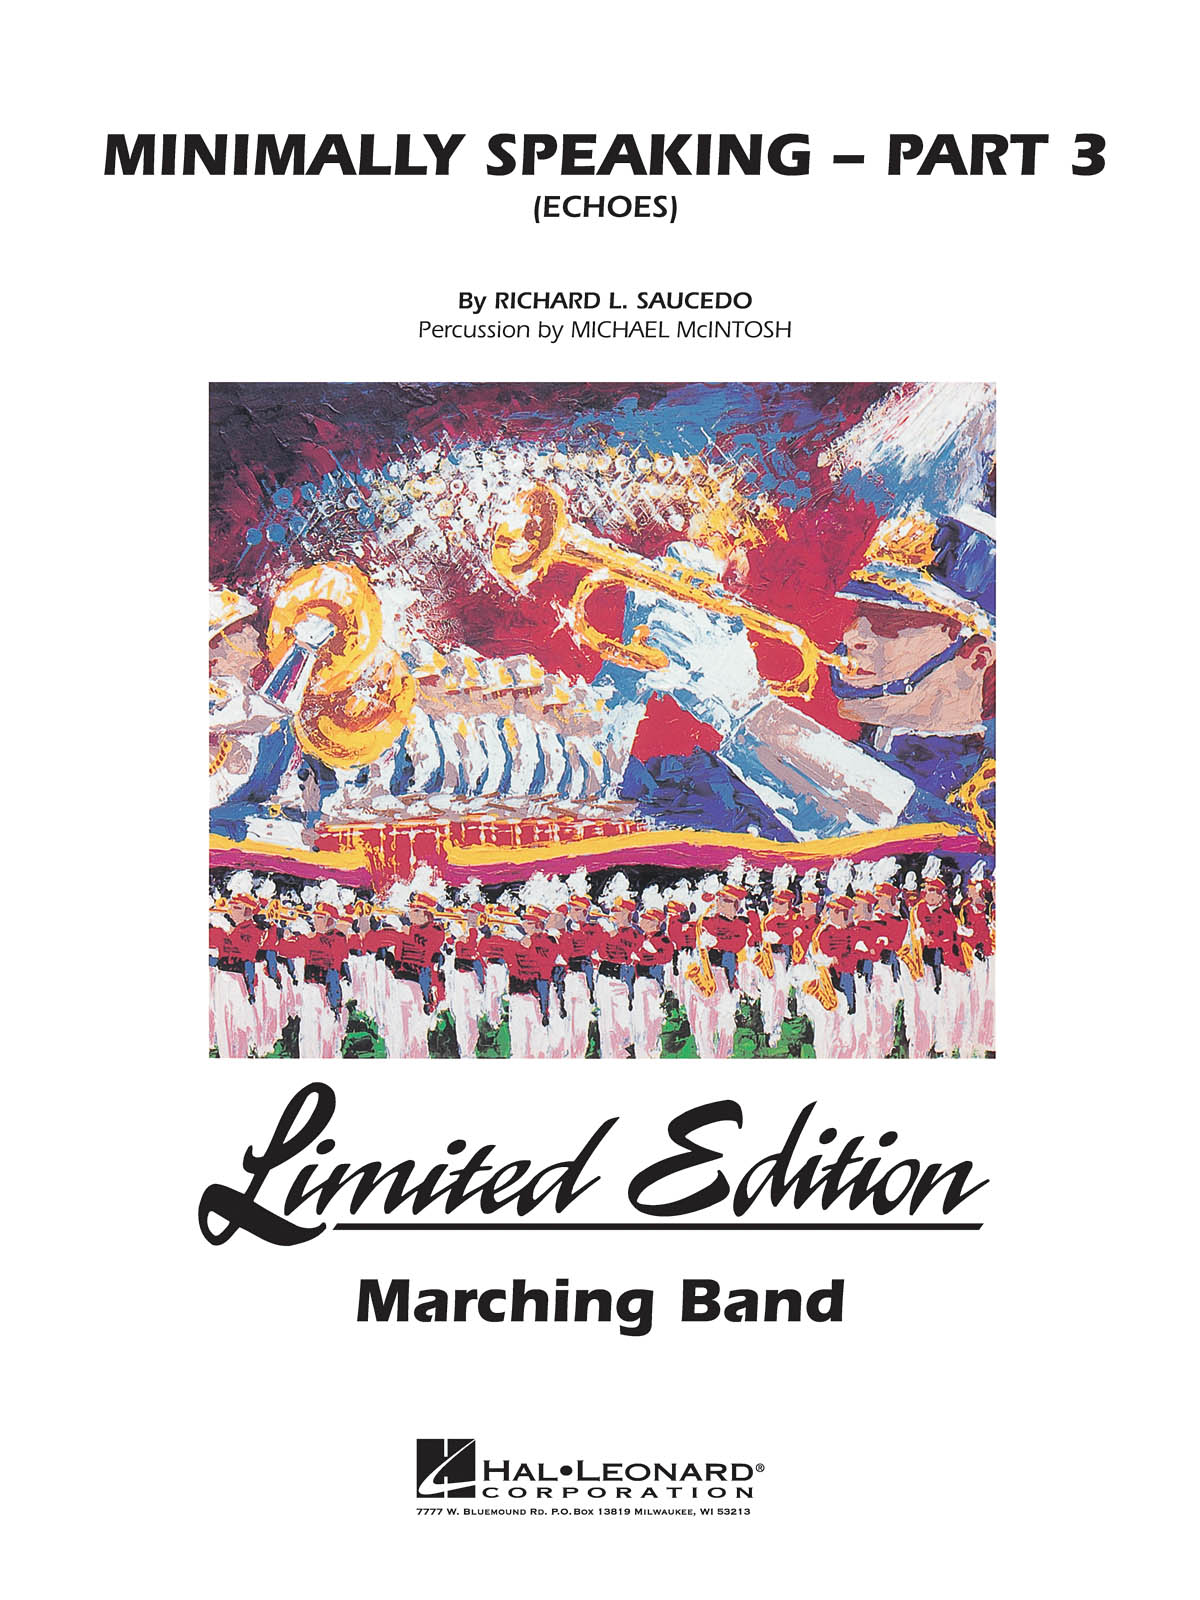 Richard L. Saucedo: Minimally Speaking - Part 3 (Echoes): Marching Band: Score &